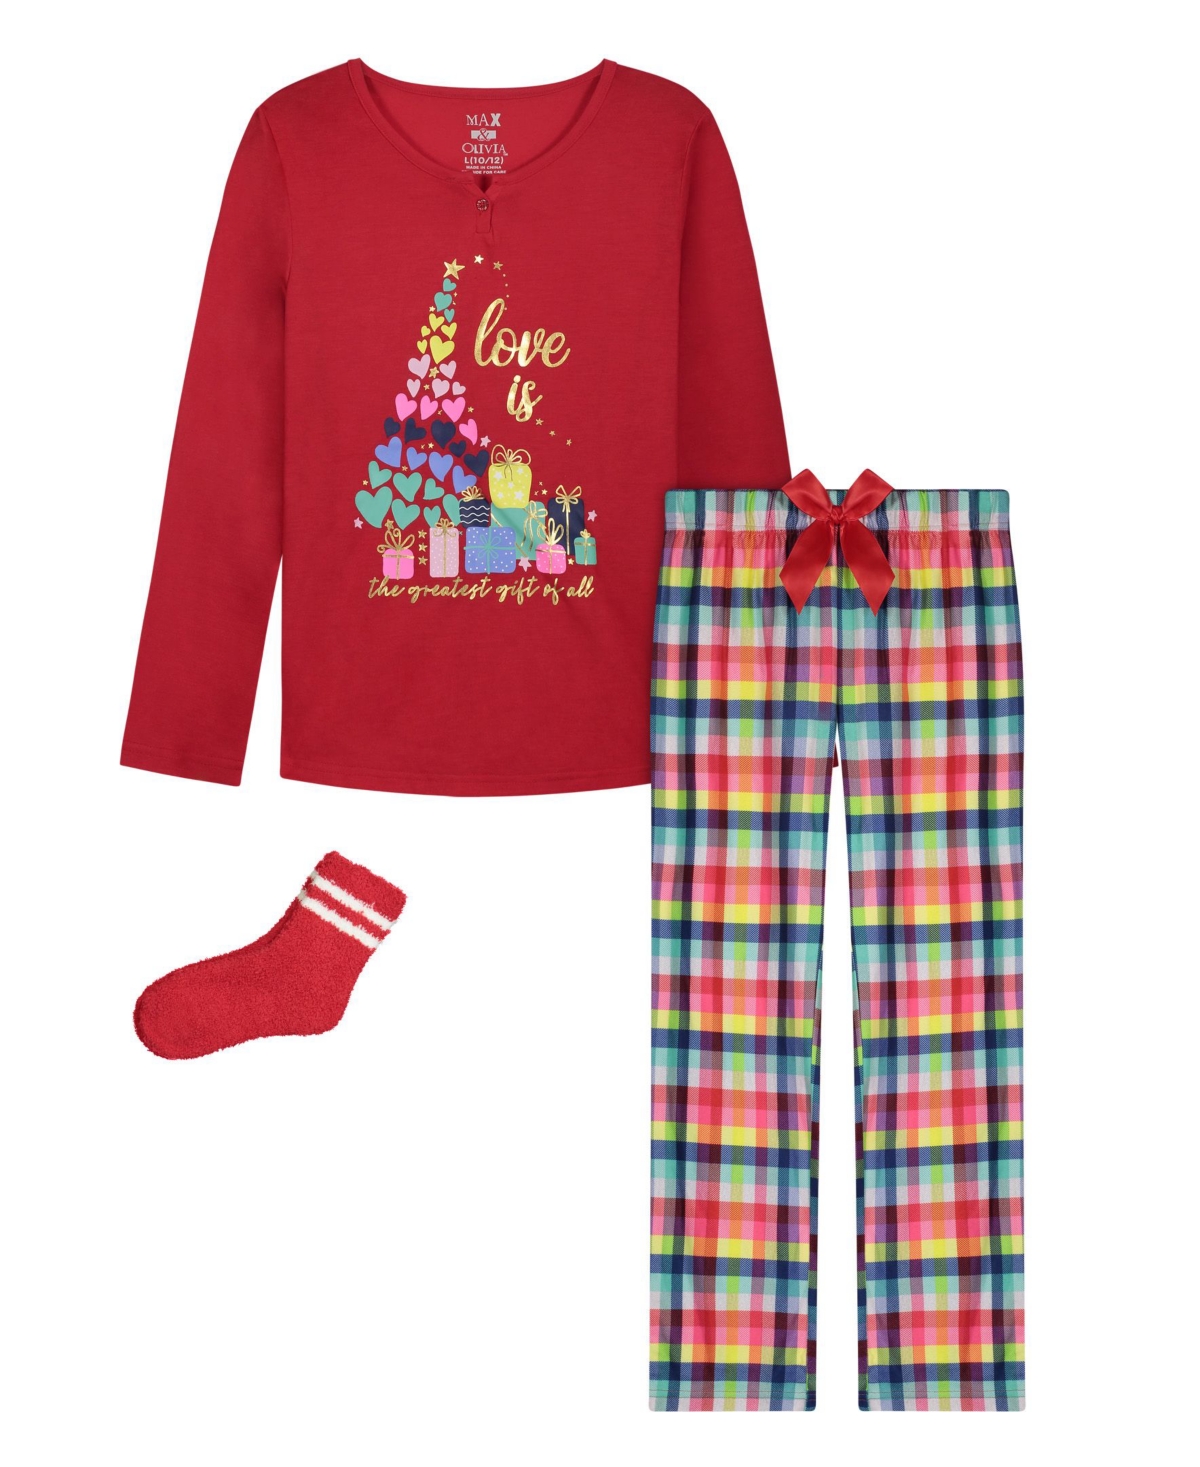 Max & Olivia Little Girls 3 Piece Holiday Top, Pajama And Socks Set In Red